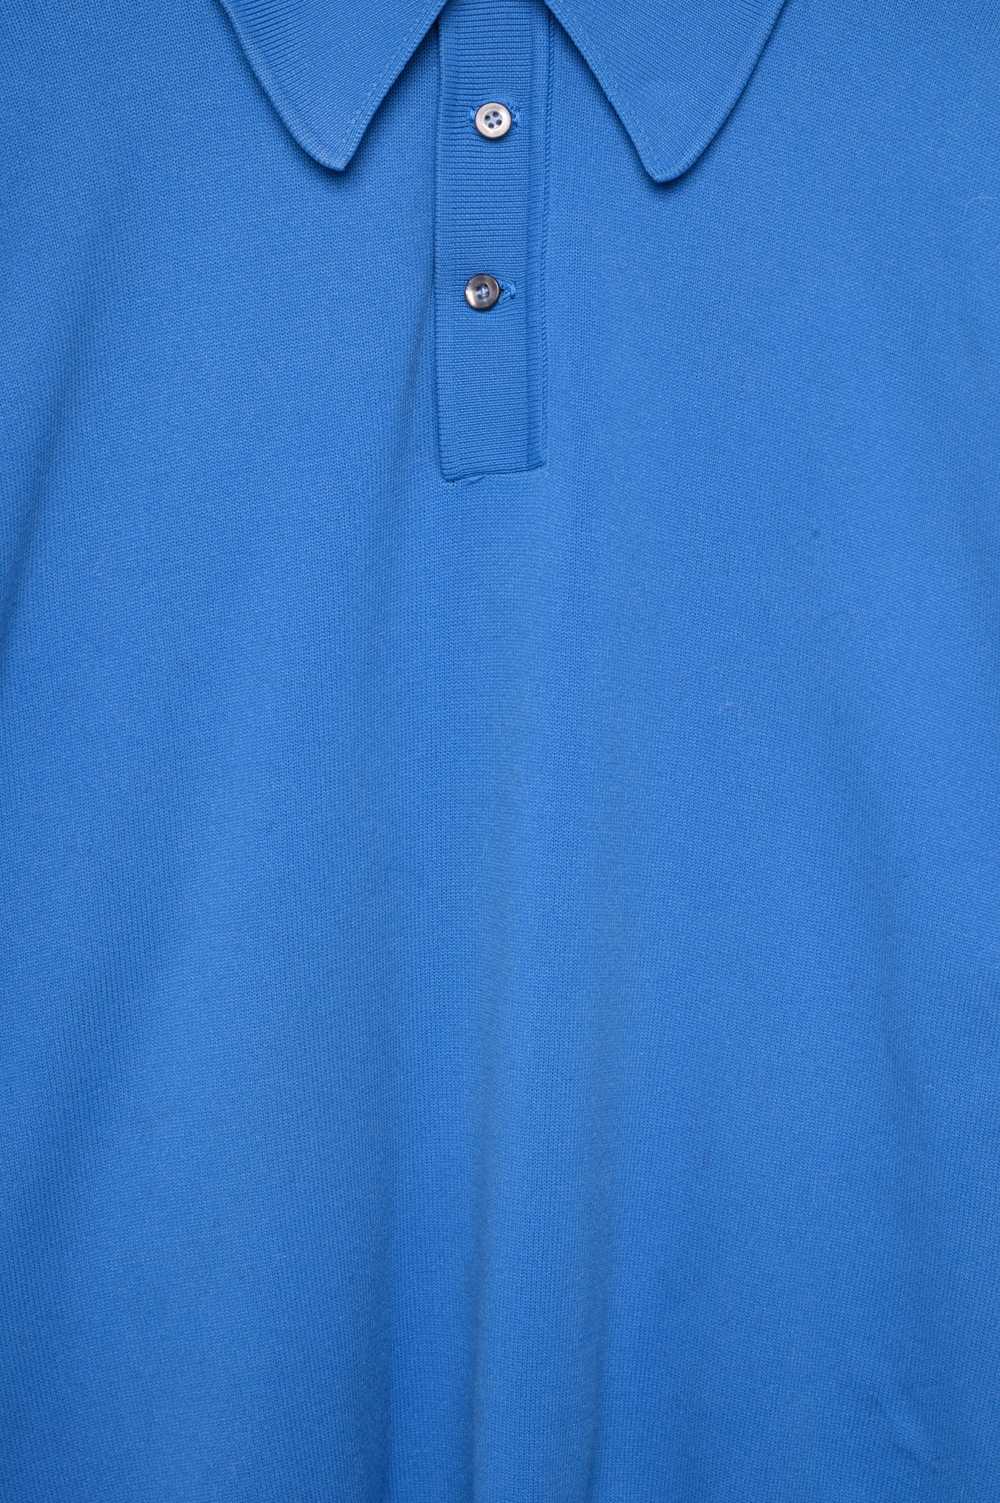 Cerulean Knit Polo - image 2